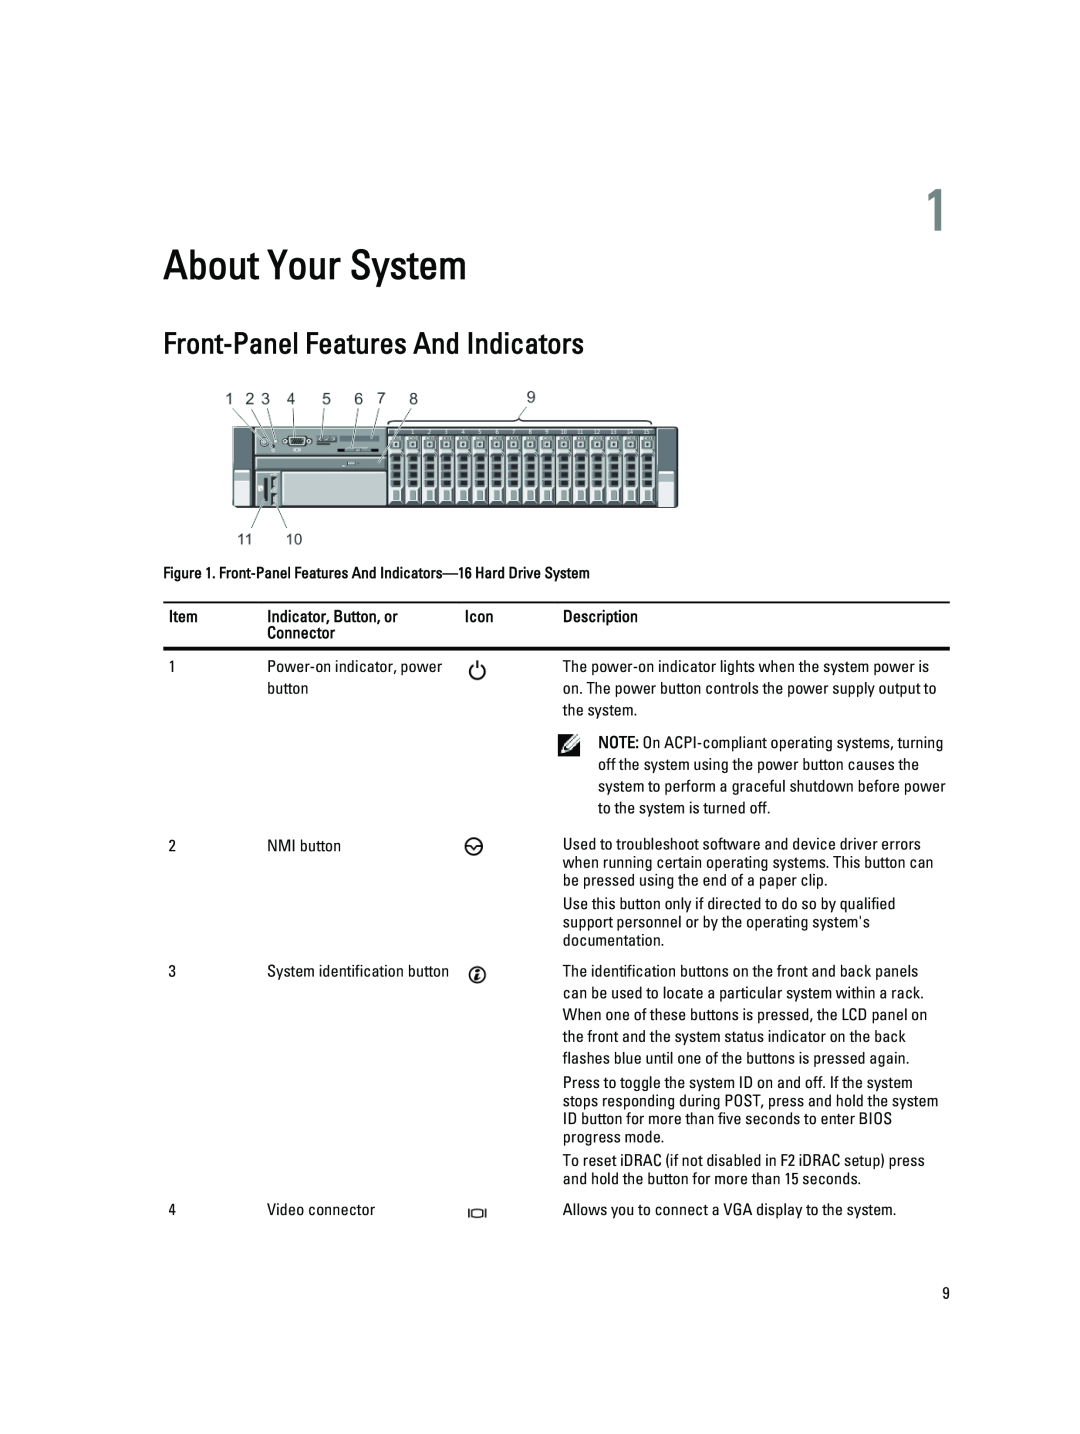 Dell R820 owner manual About Your System, Front-Panel Features And Indicators 